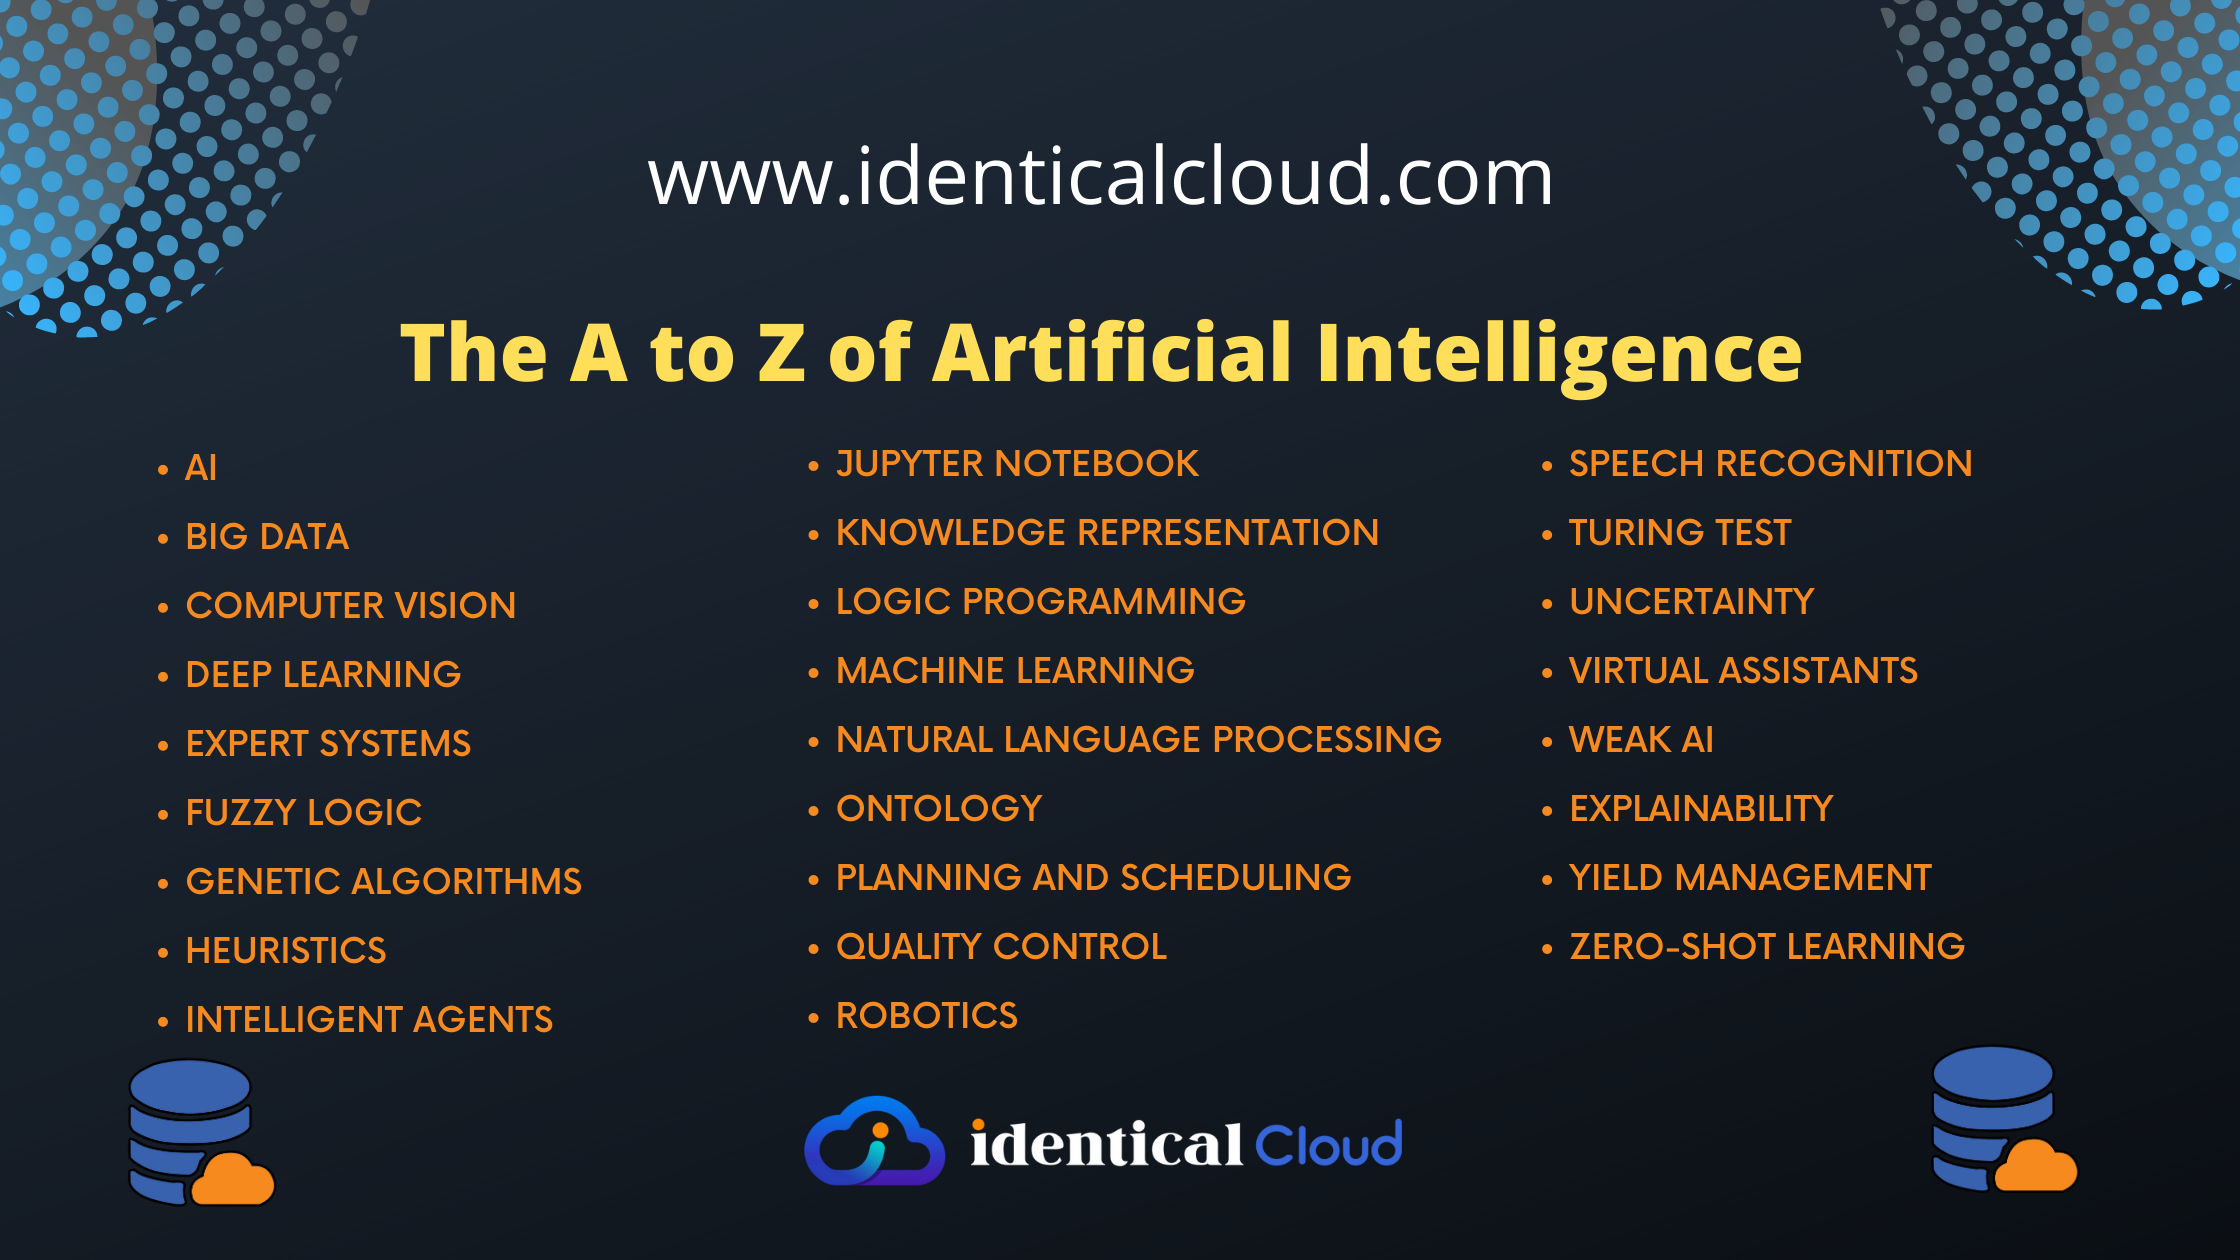 The A to Z of Artificial Intelligence - identicalcloud.com